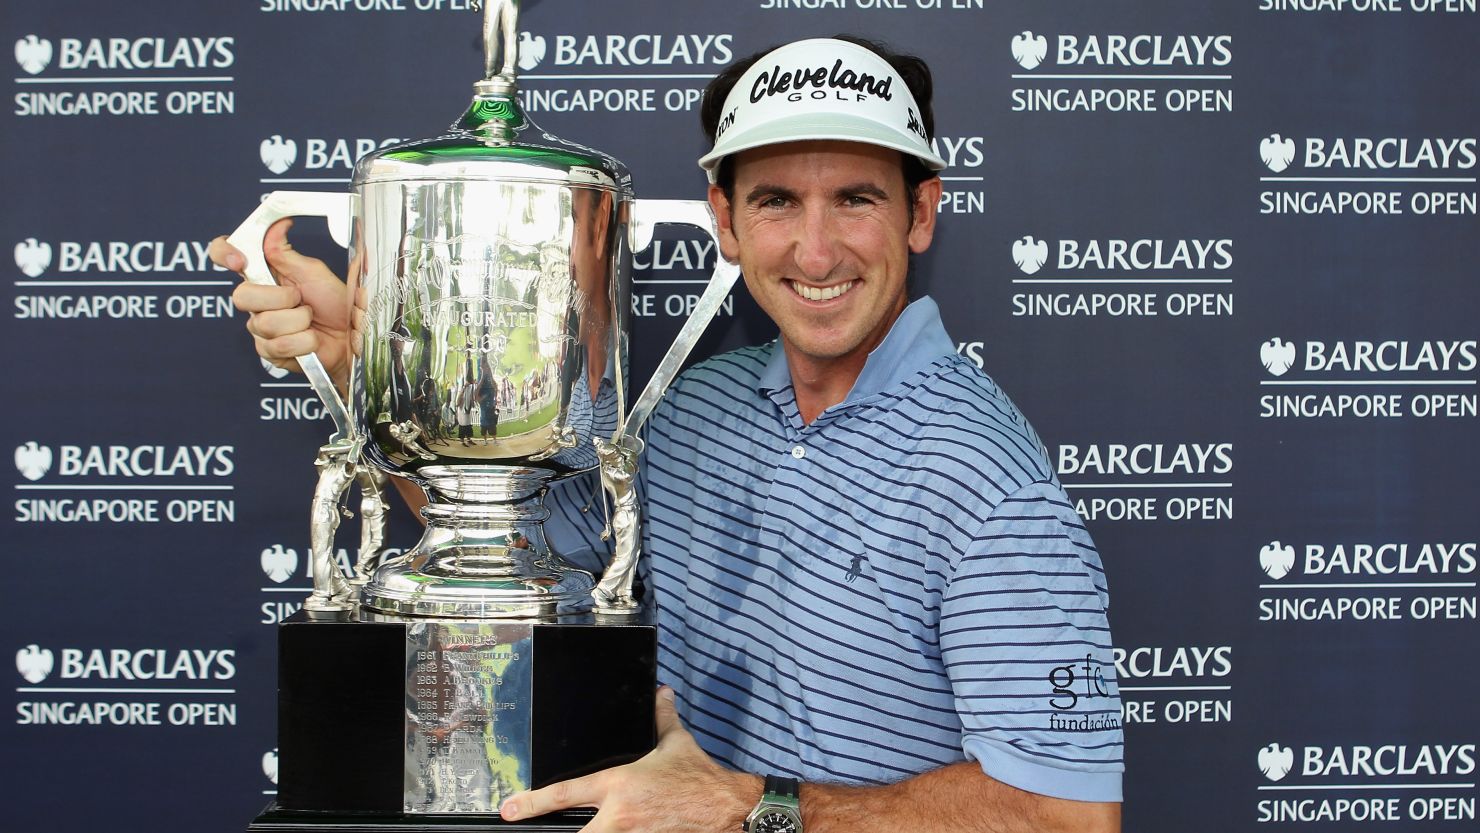 Spanish golfer Gonzalo Fernandez-Castano ended a three-year title wait as he completed a comeback from long-term injury.